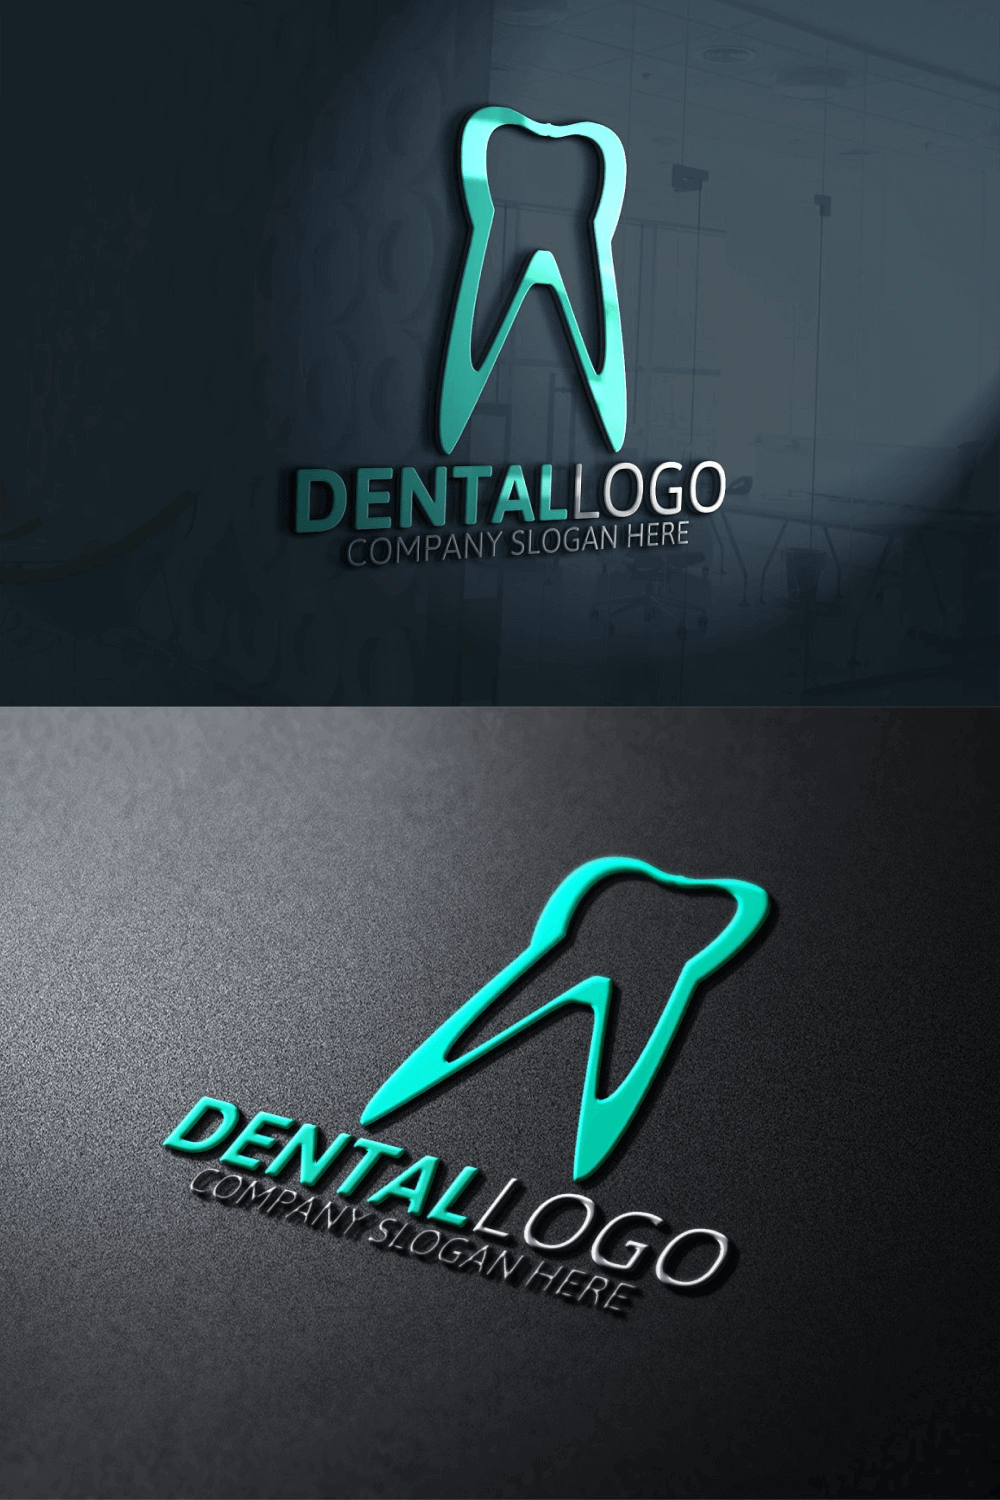 Dental on a matte and glossy surface.